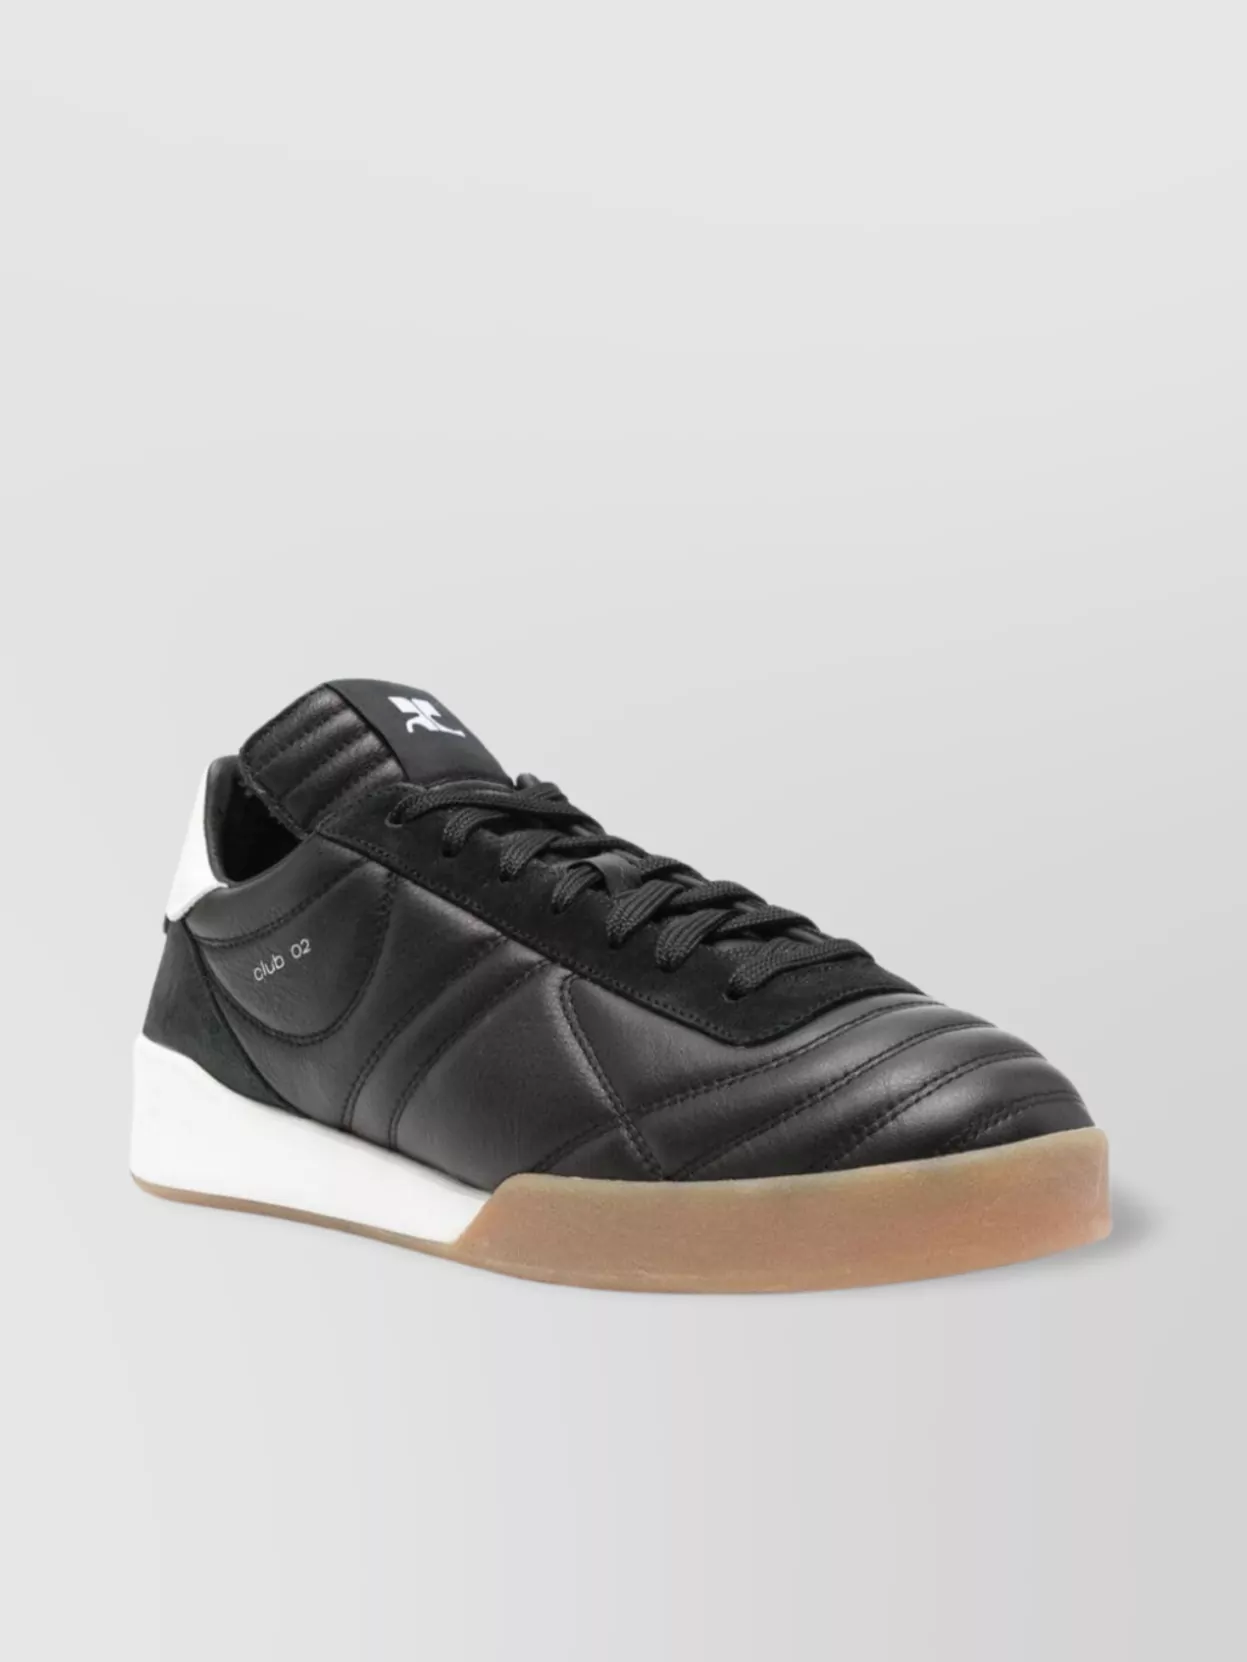 Courrèges Quilted Low Top Sneakers